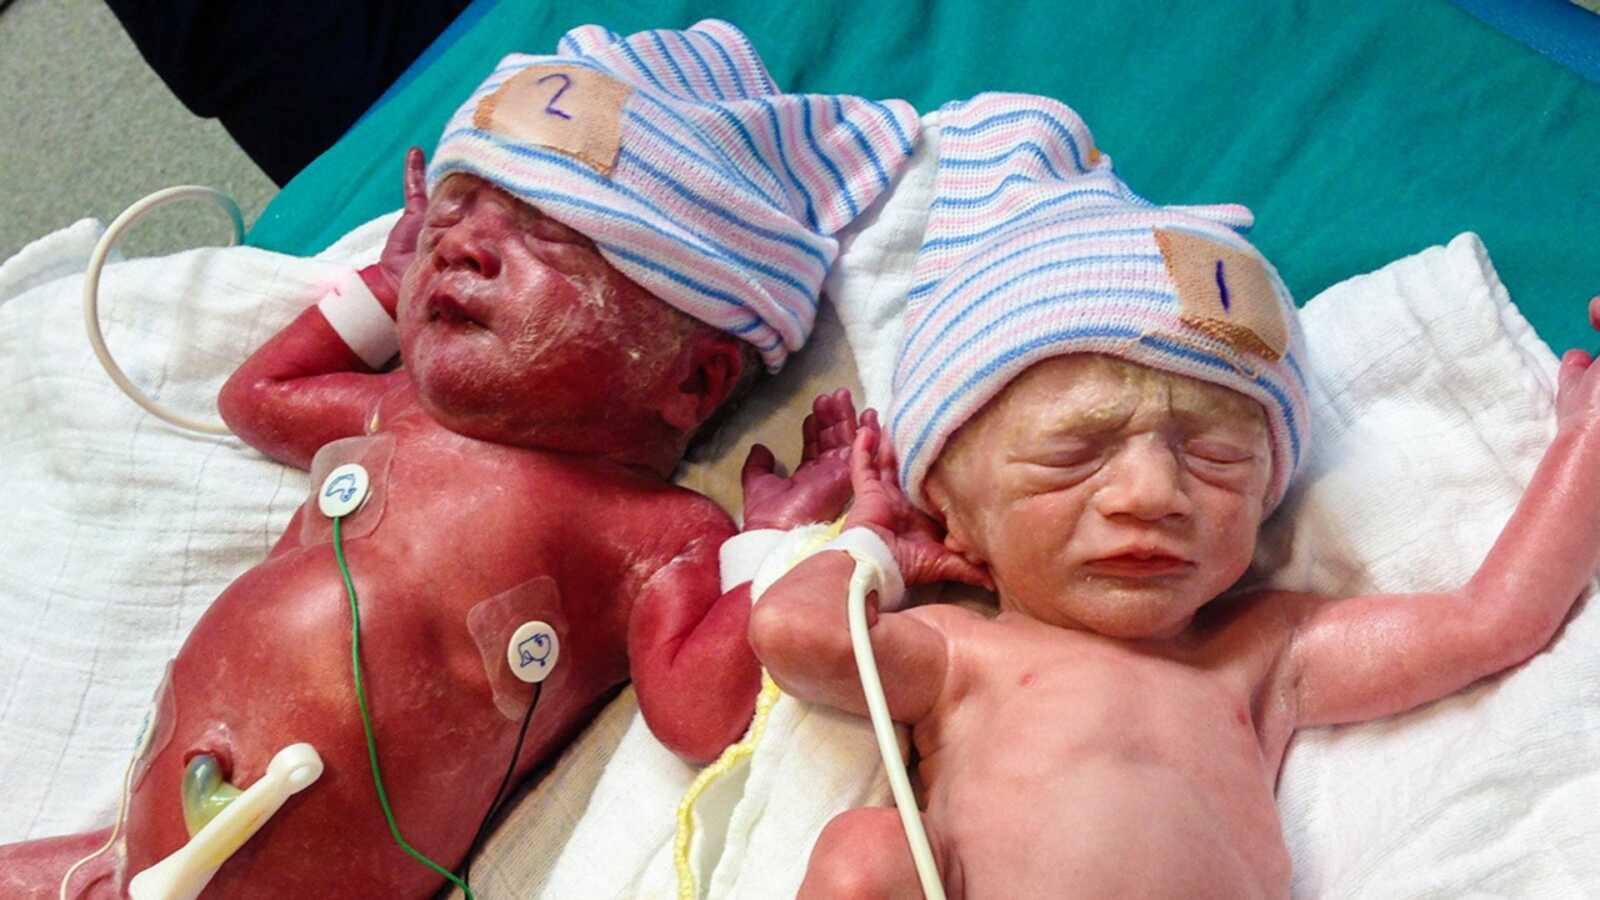 twins with rare disease